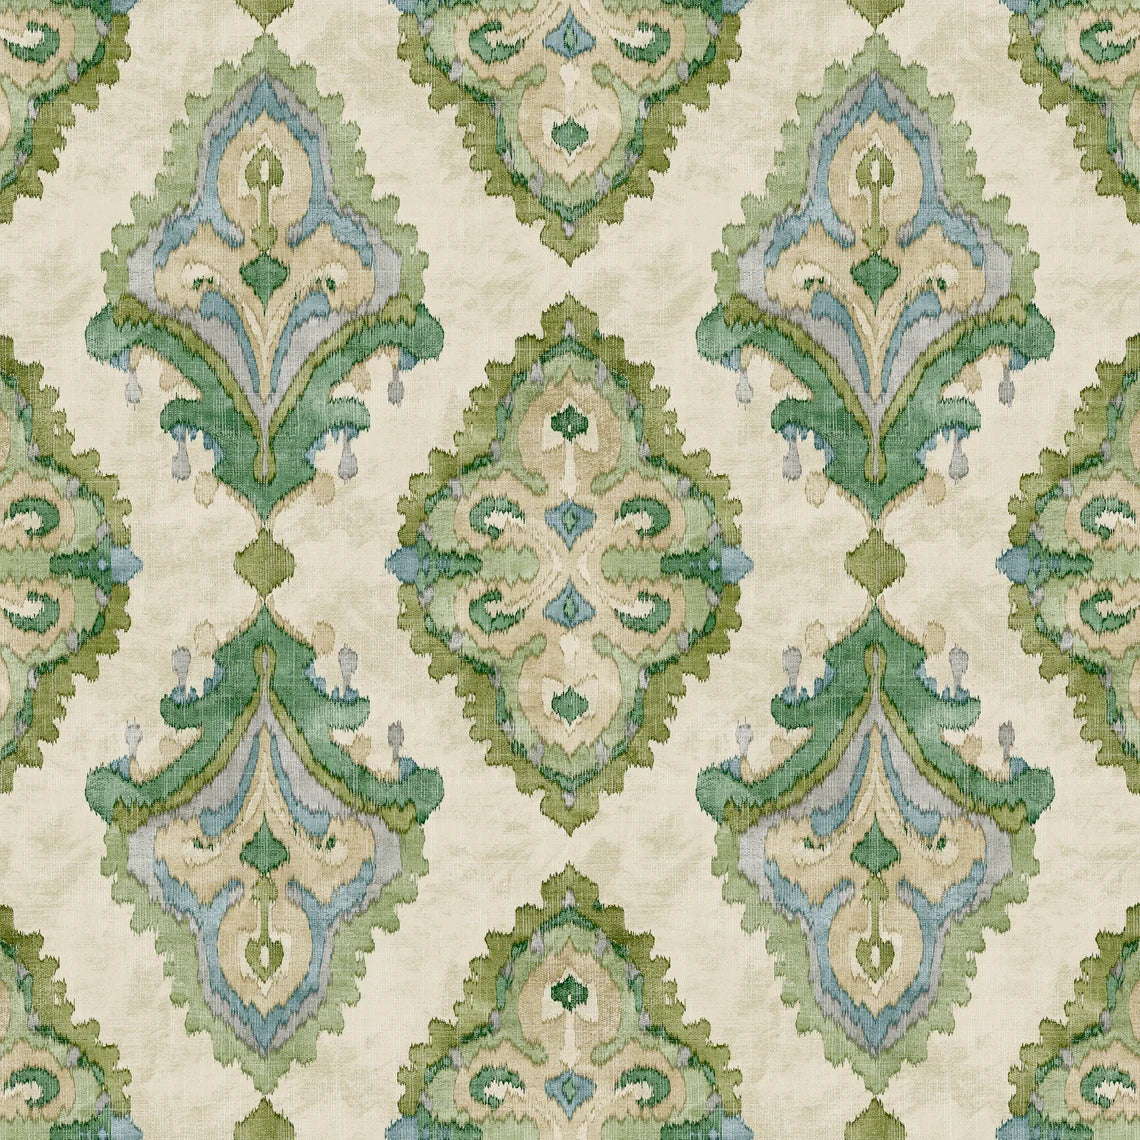 scalloped valance in Queen Bay Green, Blue Medallion Watercolor- Large Scale